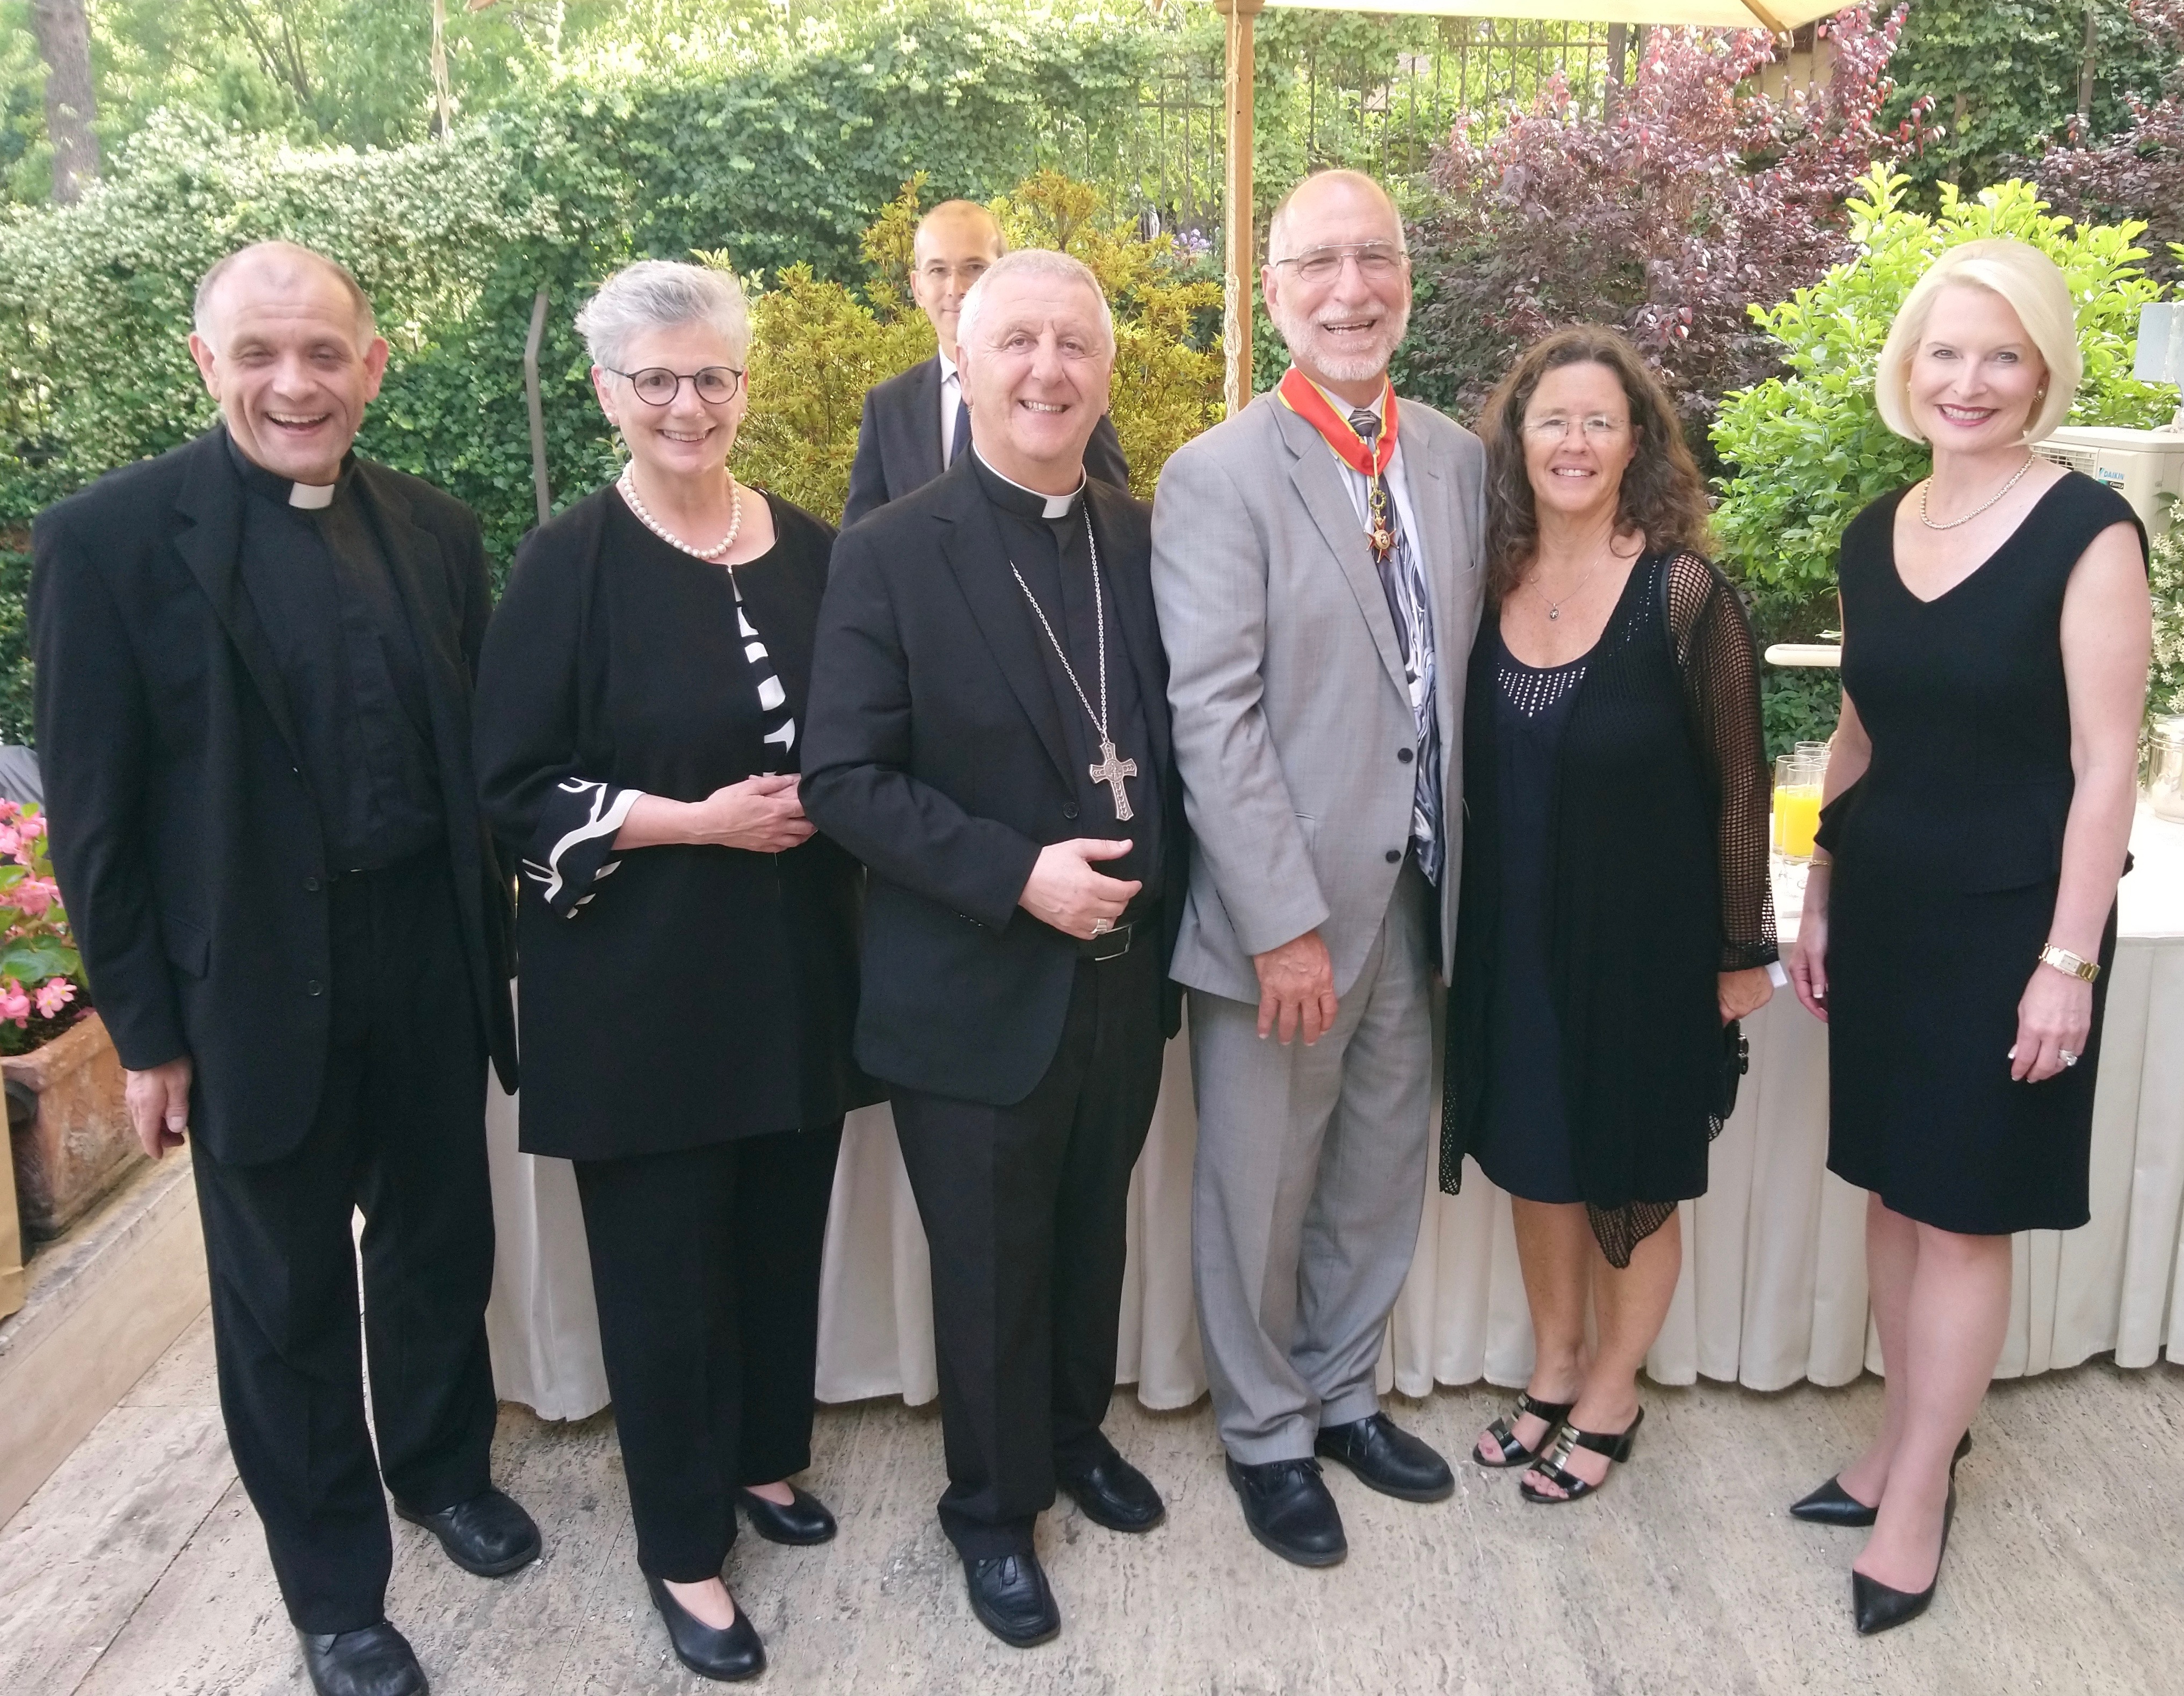 Layman honoured for outstanding contribution to Catholic higher education